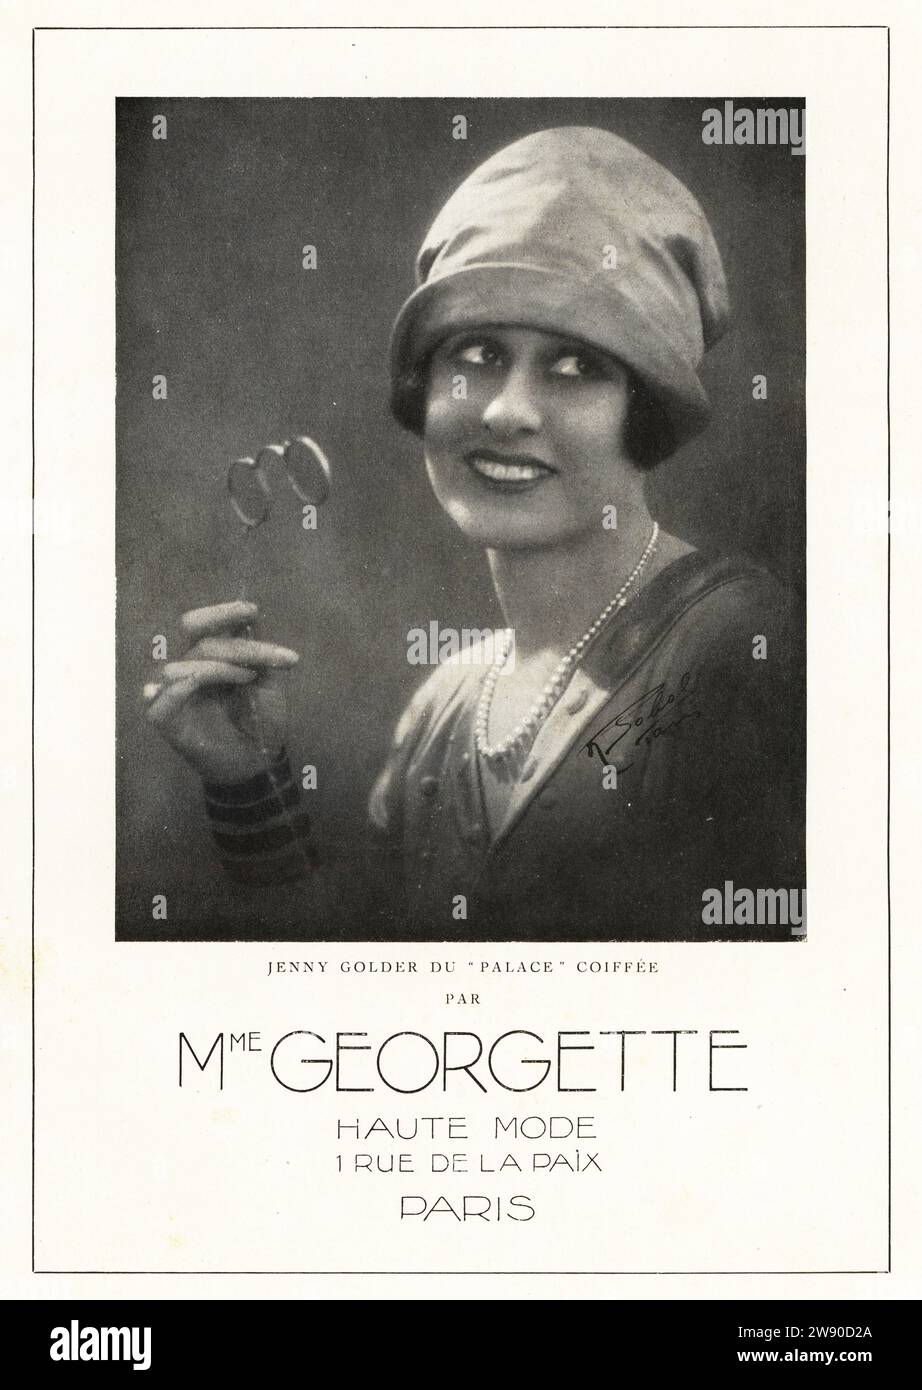 Jenny Golder (stage name of Rosie Sloman), Australia-born actress, singer and eccentric dancer, 1894-1928. Appeared with the Folies Bergeres in London in 1925. In a cloche hat by Madame Georgette, Paris milliner of 1 rue de la Paix. Advertisement with b/w photograph by Ruben Sobol from Art, Gout, Beaute, published by fashion magazine AGB, Lyon, January 1927. Stock Photo